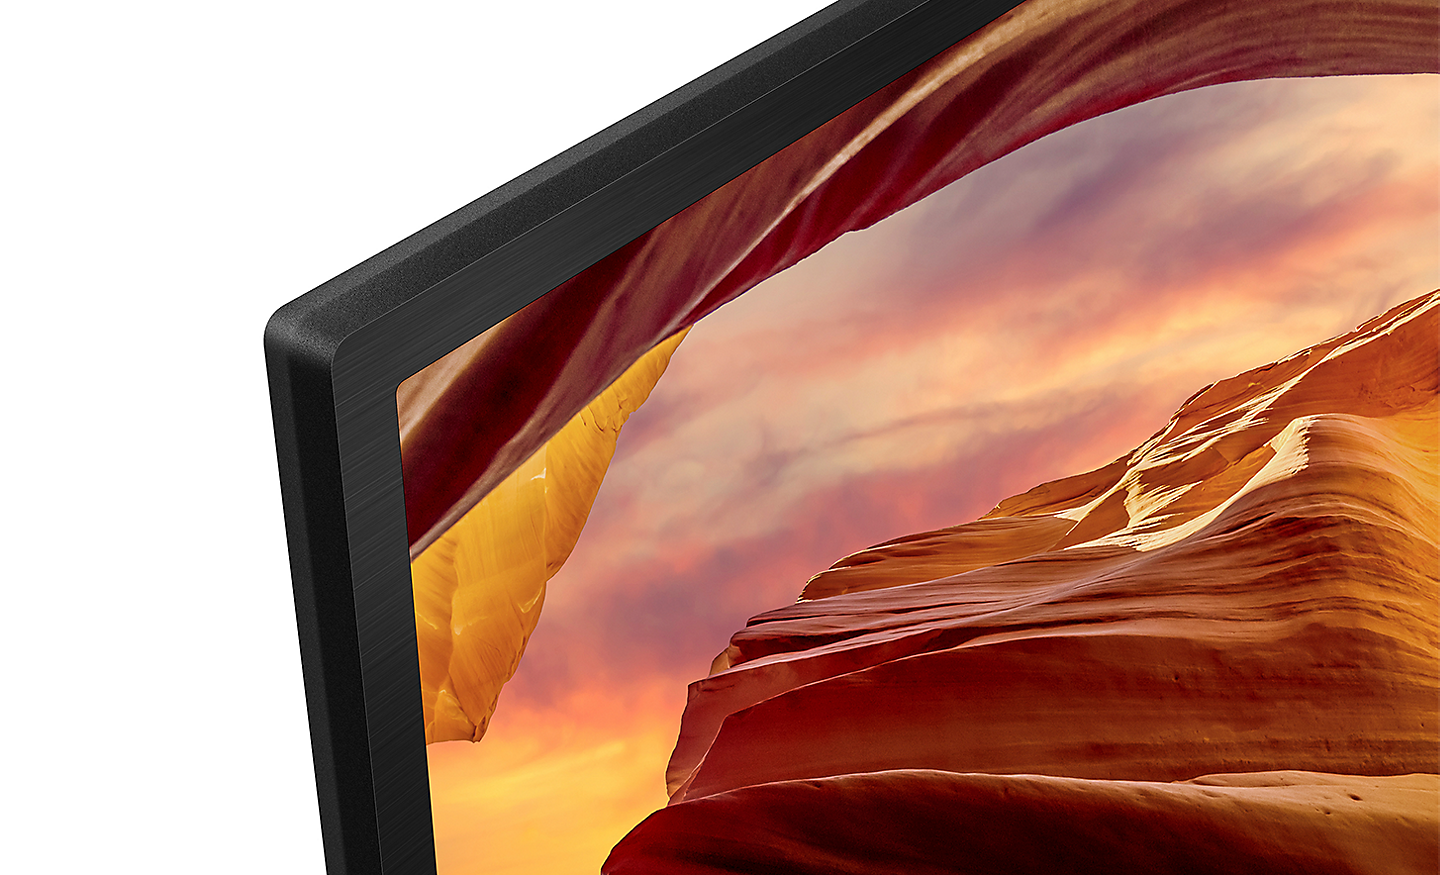 Close-up of the bezel of X74L Series BRAVIA TV with screenshot of rock formations